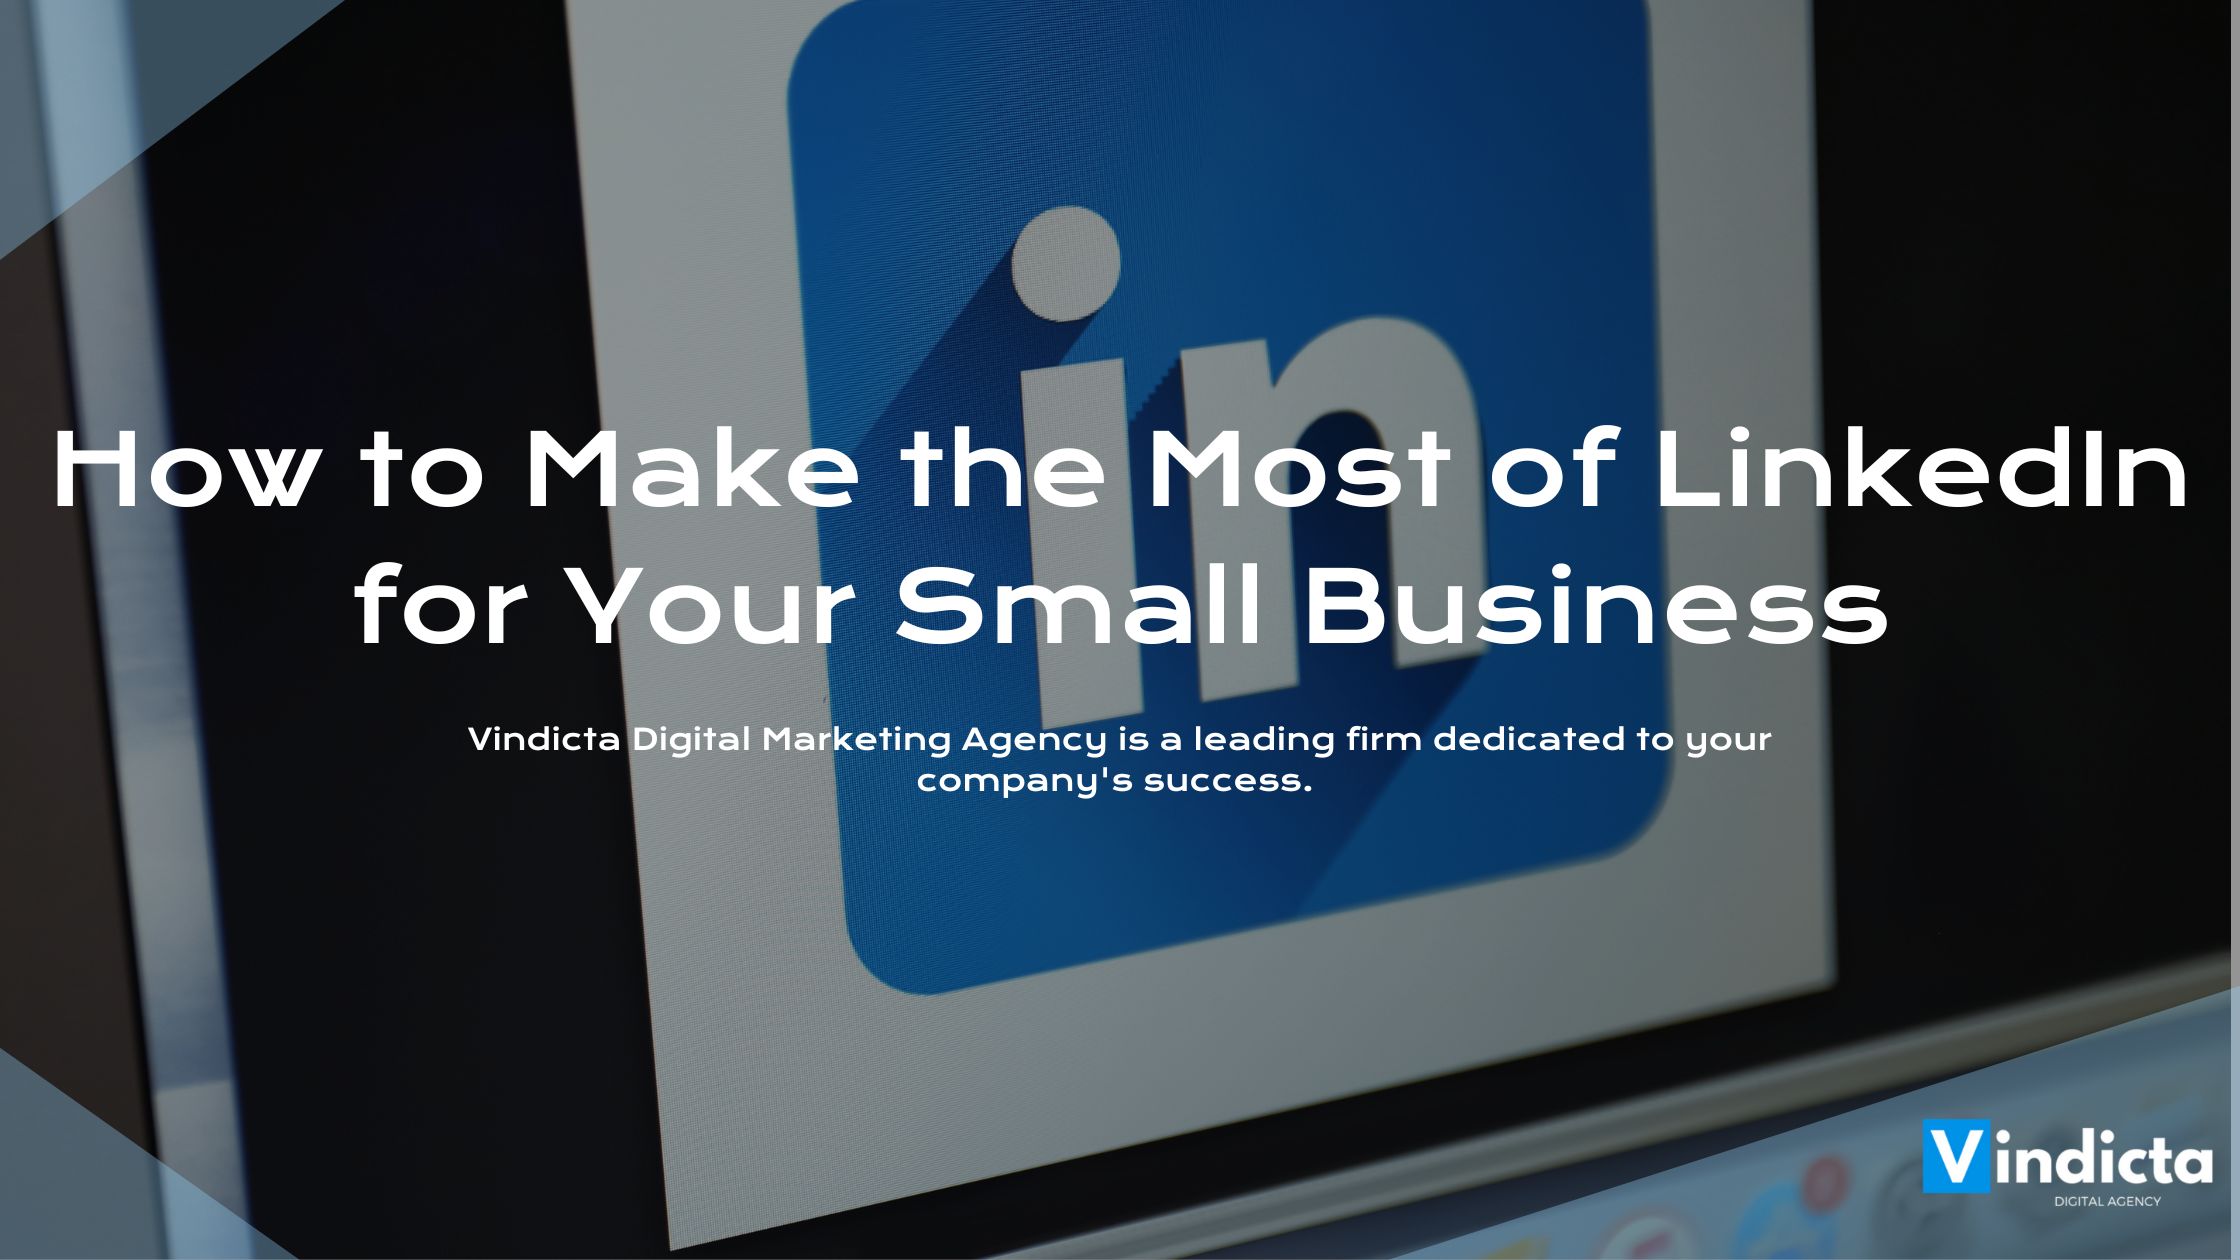 How to Make the Most of LinkedIn for Your Small Business